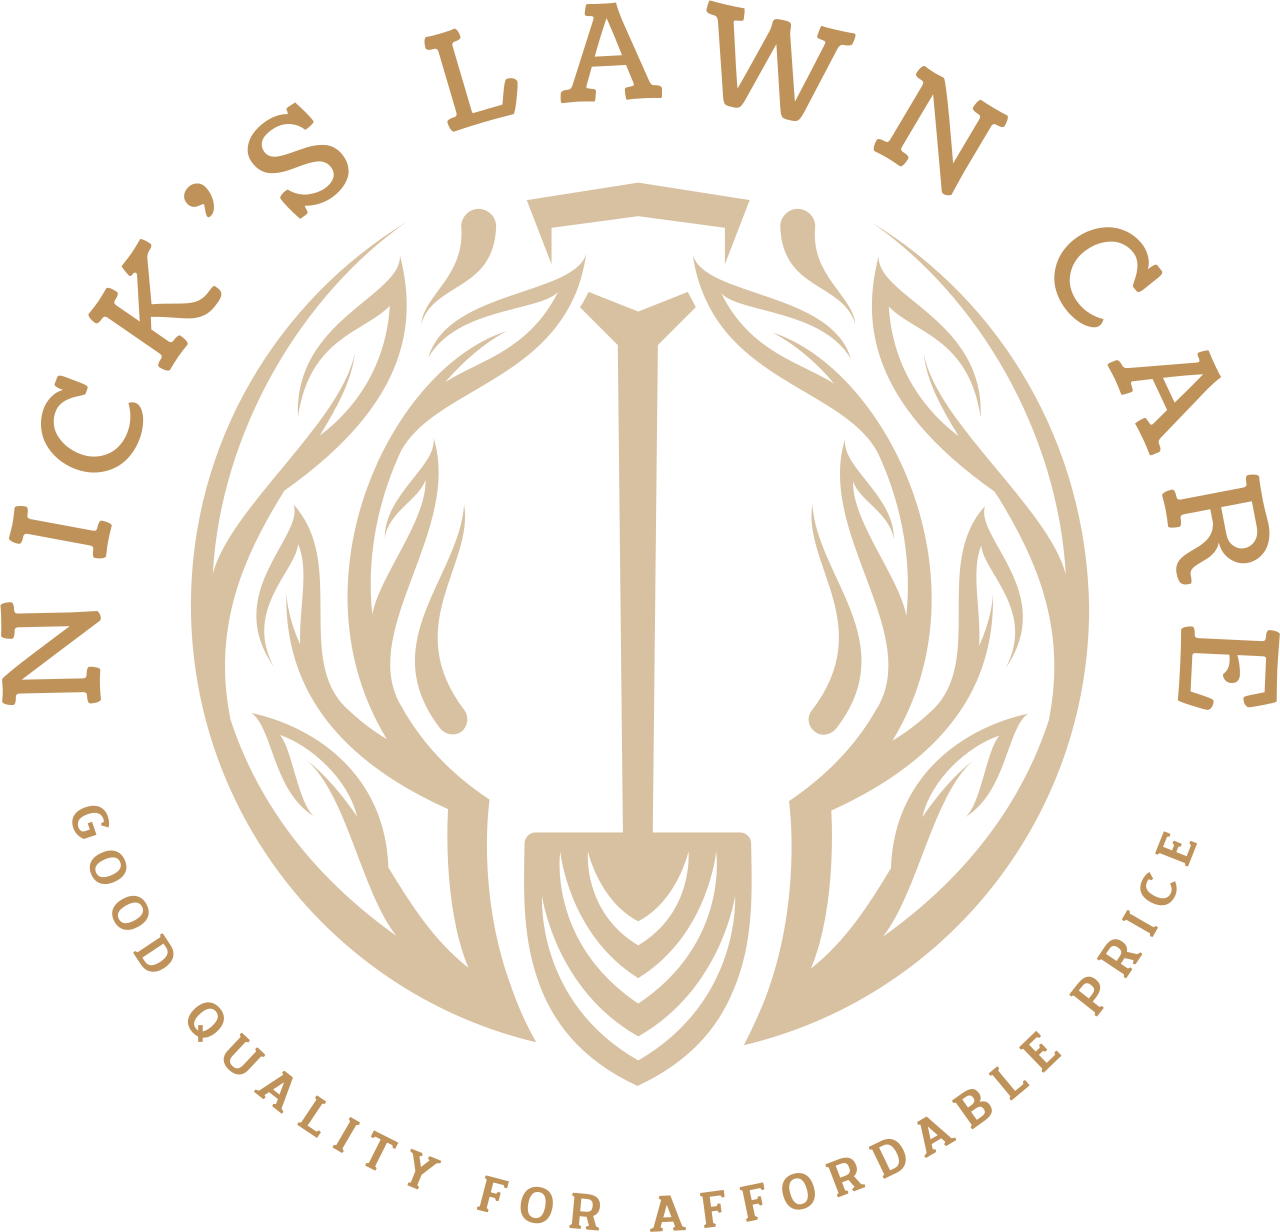 NICK'S LAWN CARE's logo